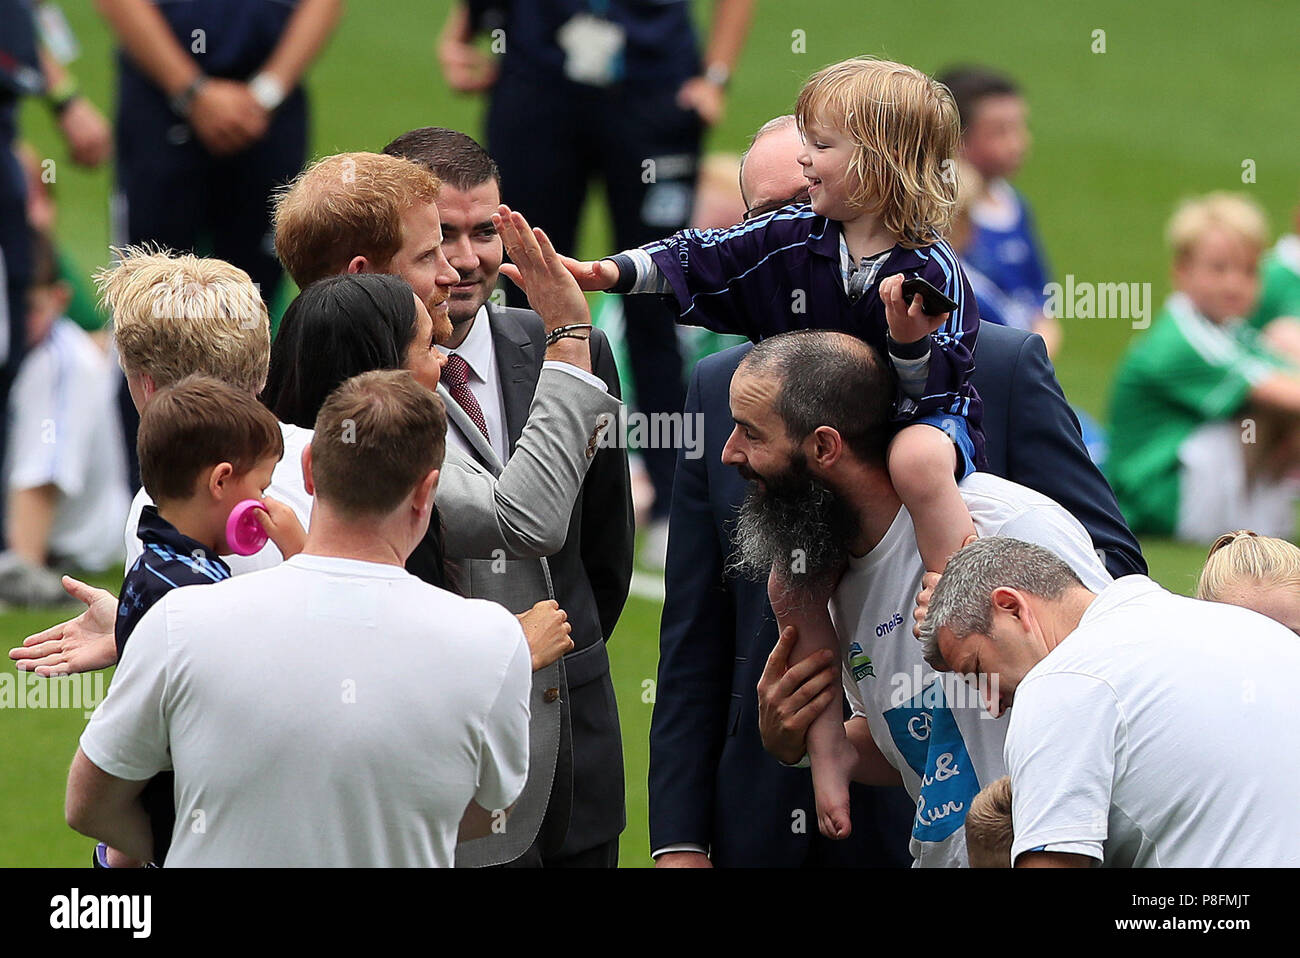 The Duke of Sussex gives a high five to Walter Kieran, 3, prior to him touching the Duchess of Sussex's hair during during a visit to Croke Park on the second day of their visit to Dublin, Ireland. Picture date: Wednesday July 11, 2018. See PA story ROYAL Sussex. Photo credit should read: Brian Lawless/PA Wire Stock Photo